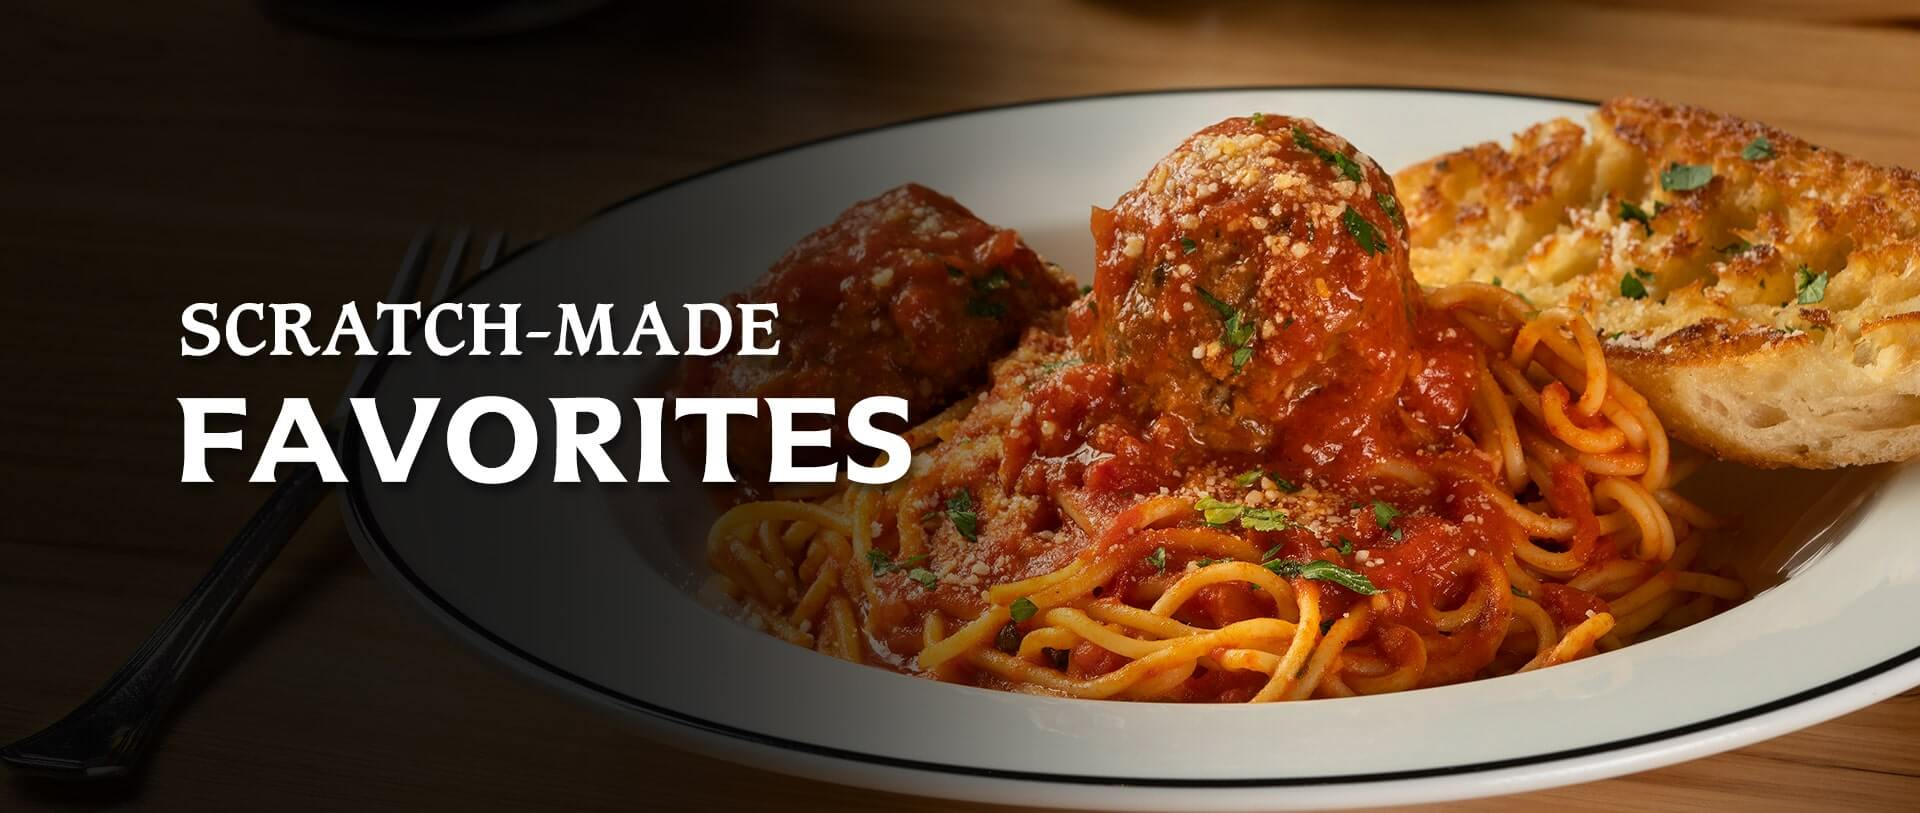 scratch made favorites - meatball and spaghetti